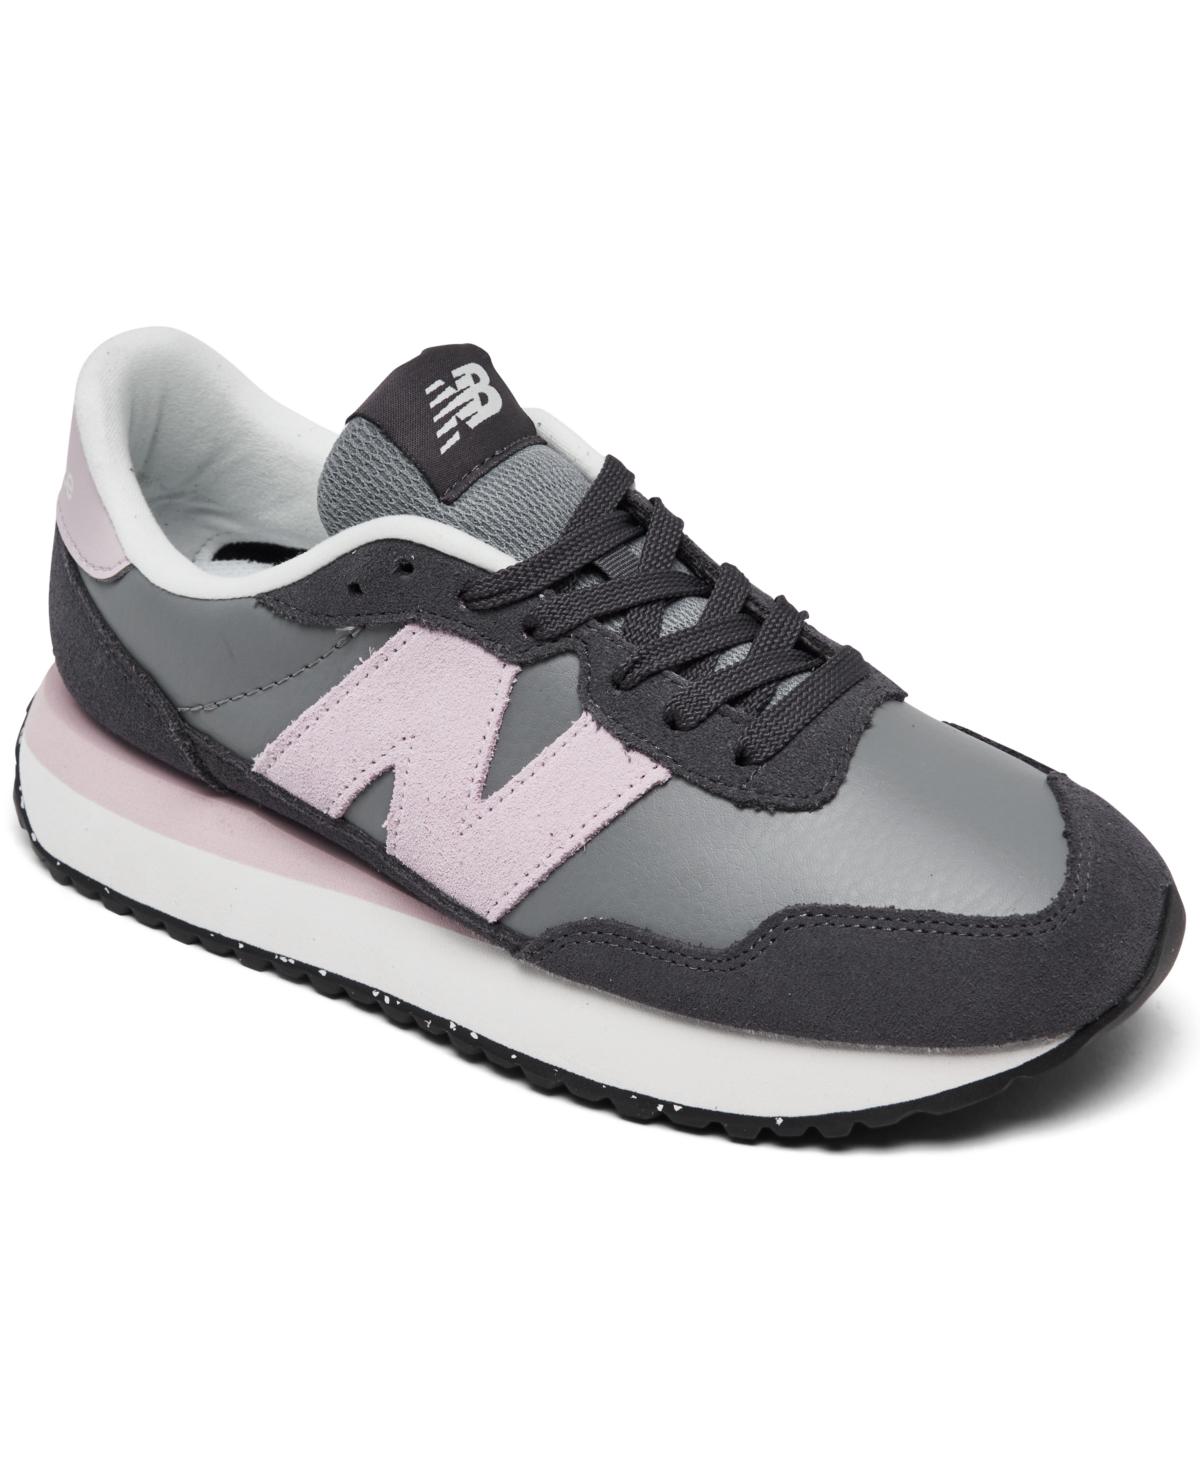 Buy New Balance Men's 608 V5 Casual Comfort Cross Trainer, White/Navy, 8  X-Wide at Amazon.in